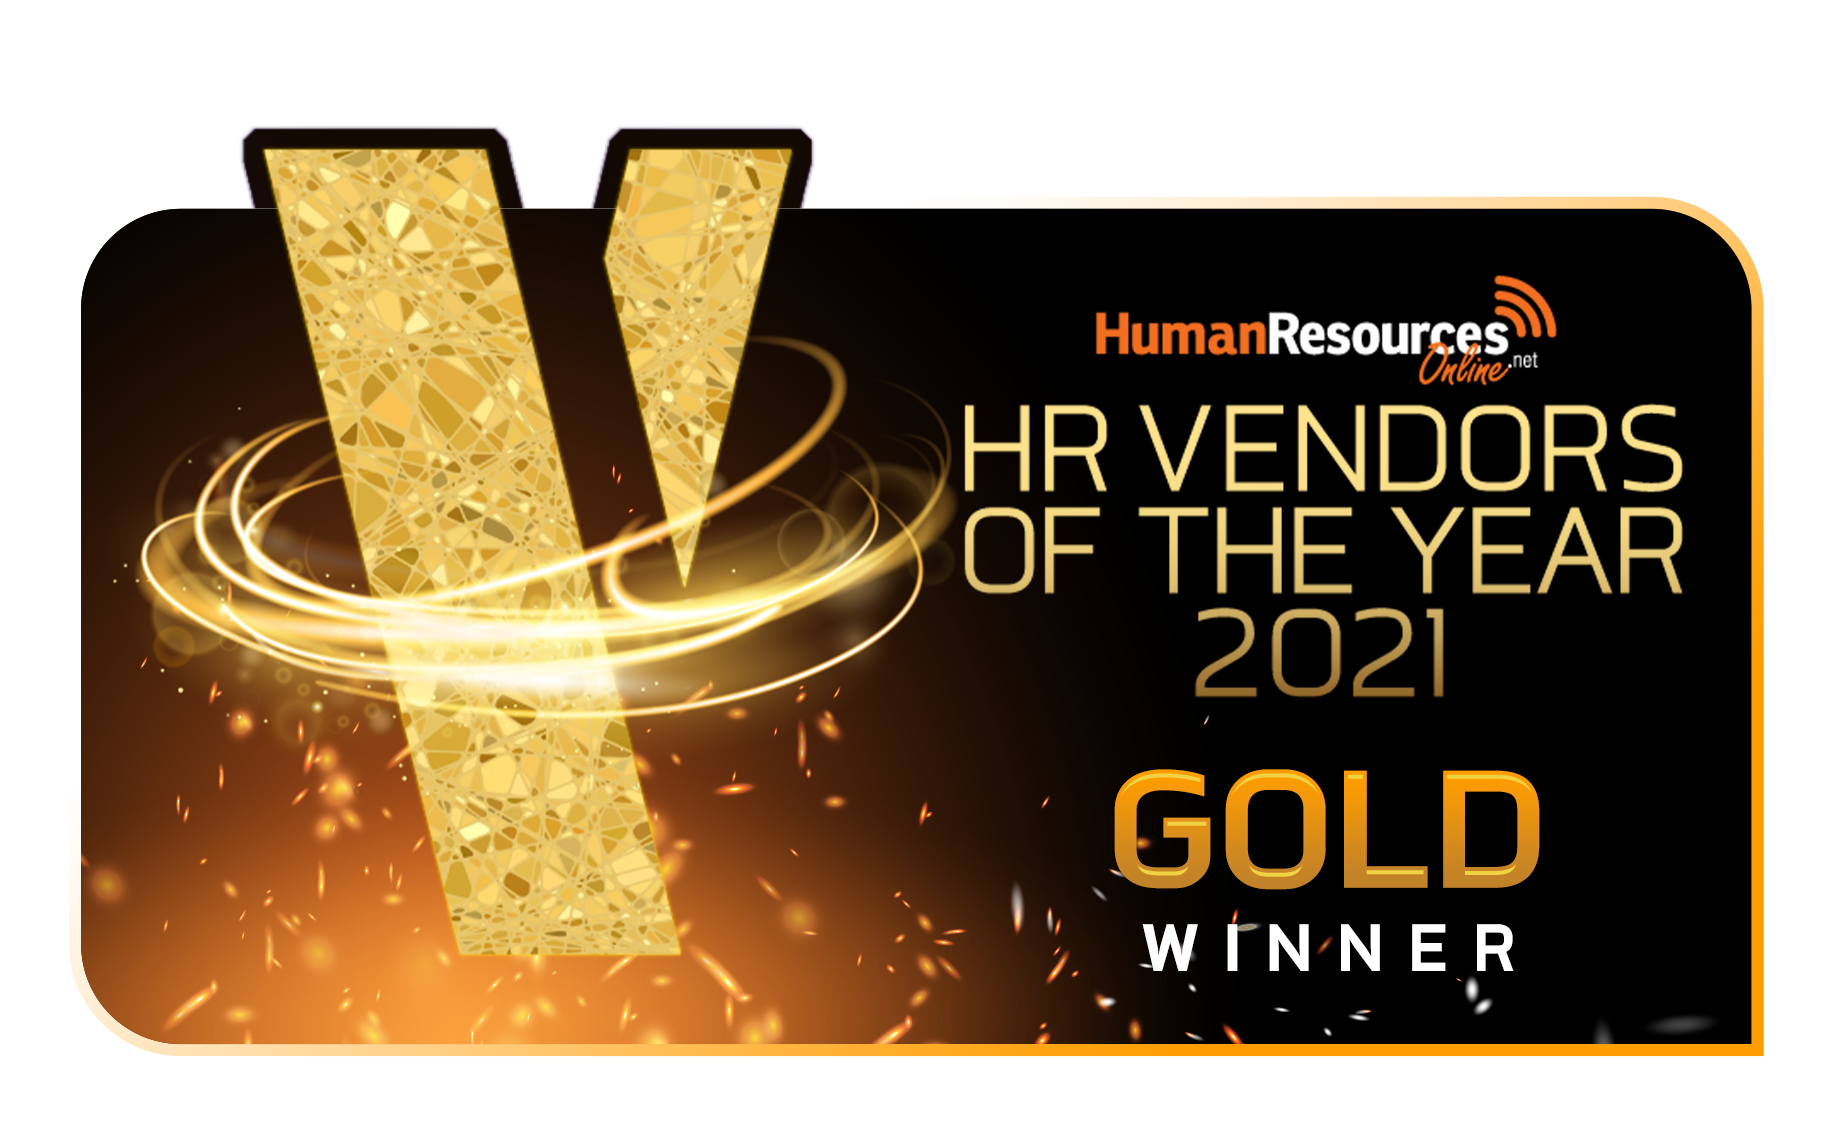 HR Vendors of the Year 2021